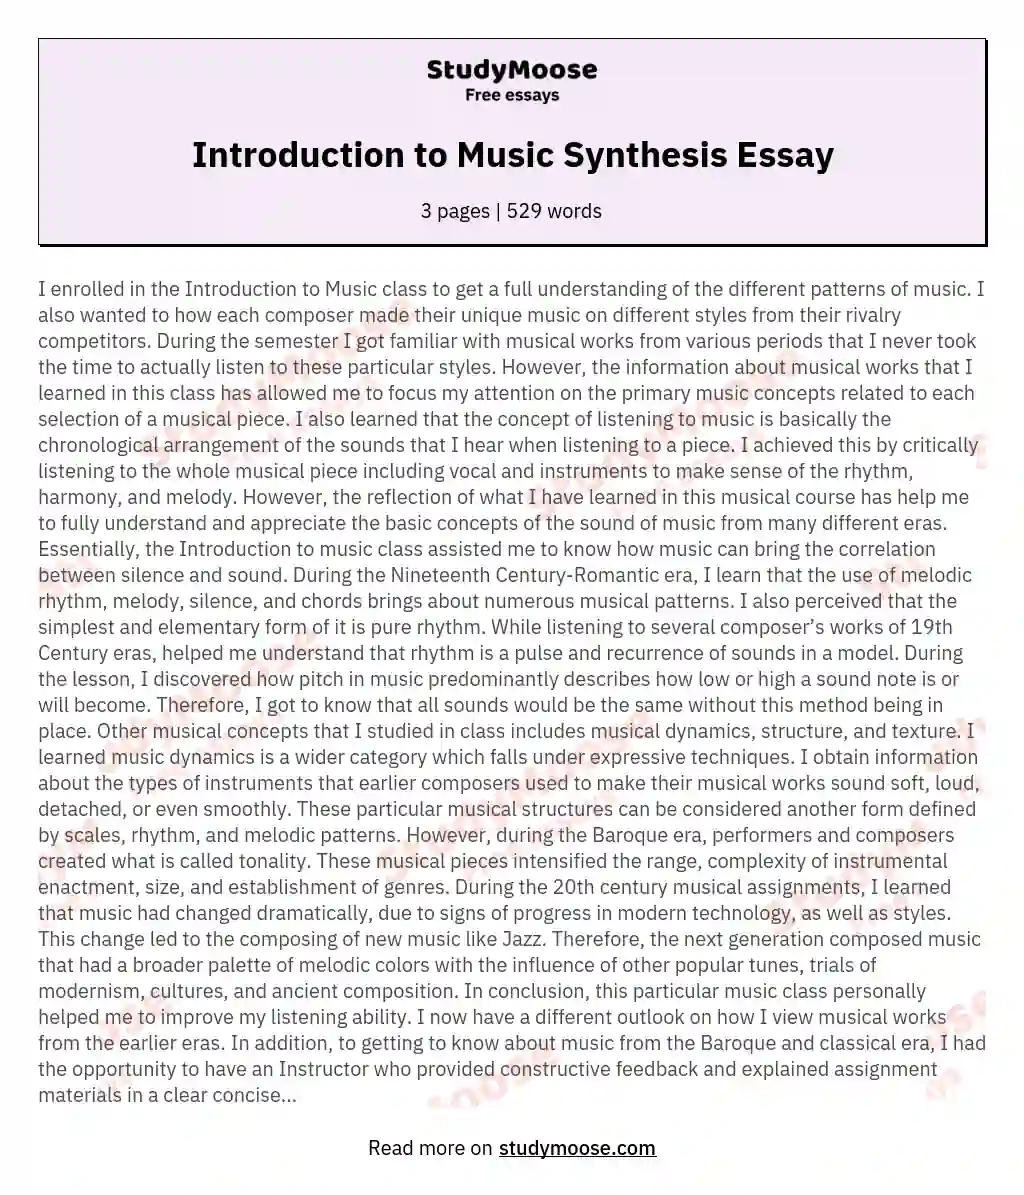 Introduction to Music Synthesis Essay essay